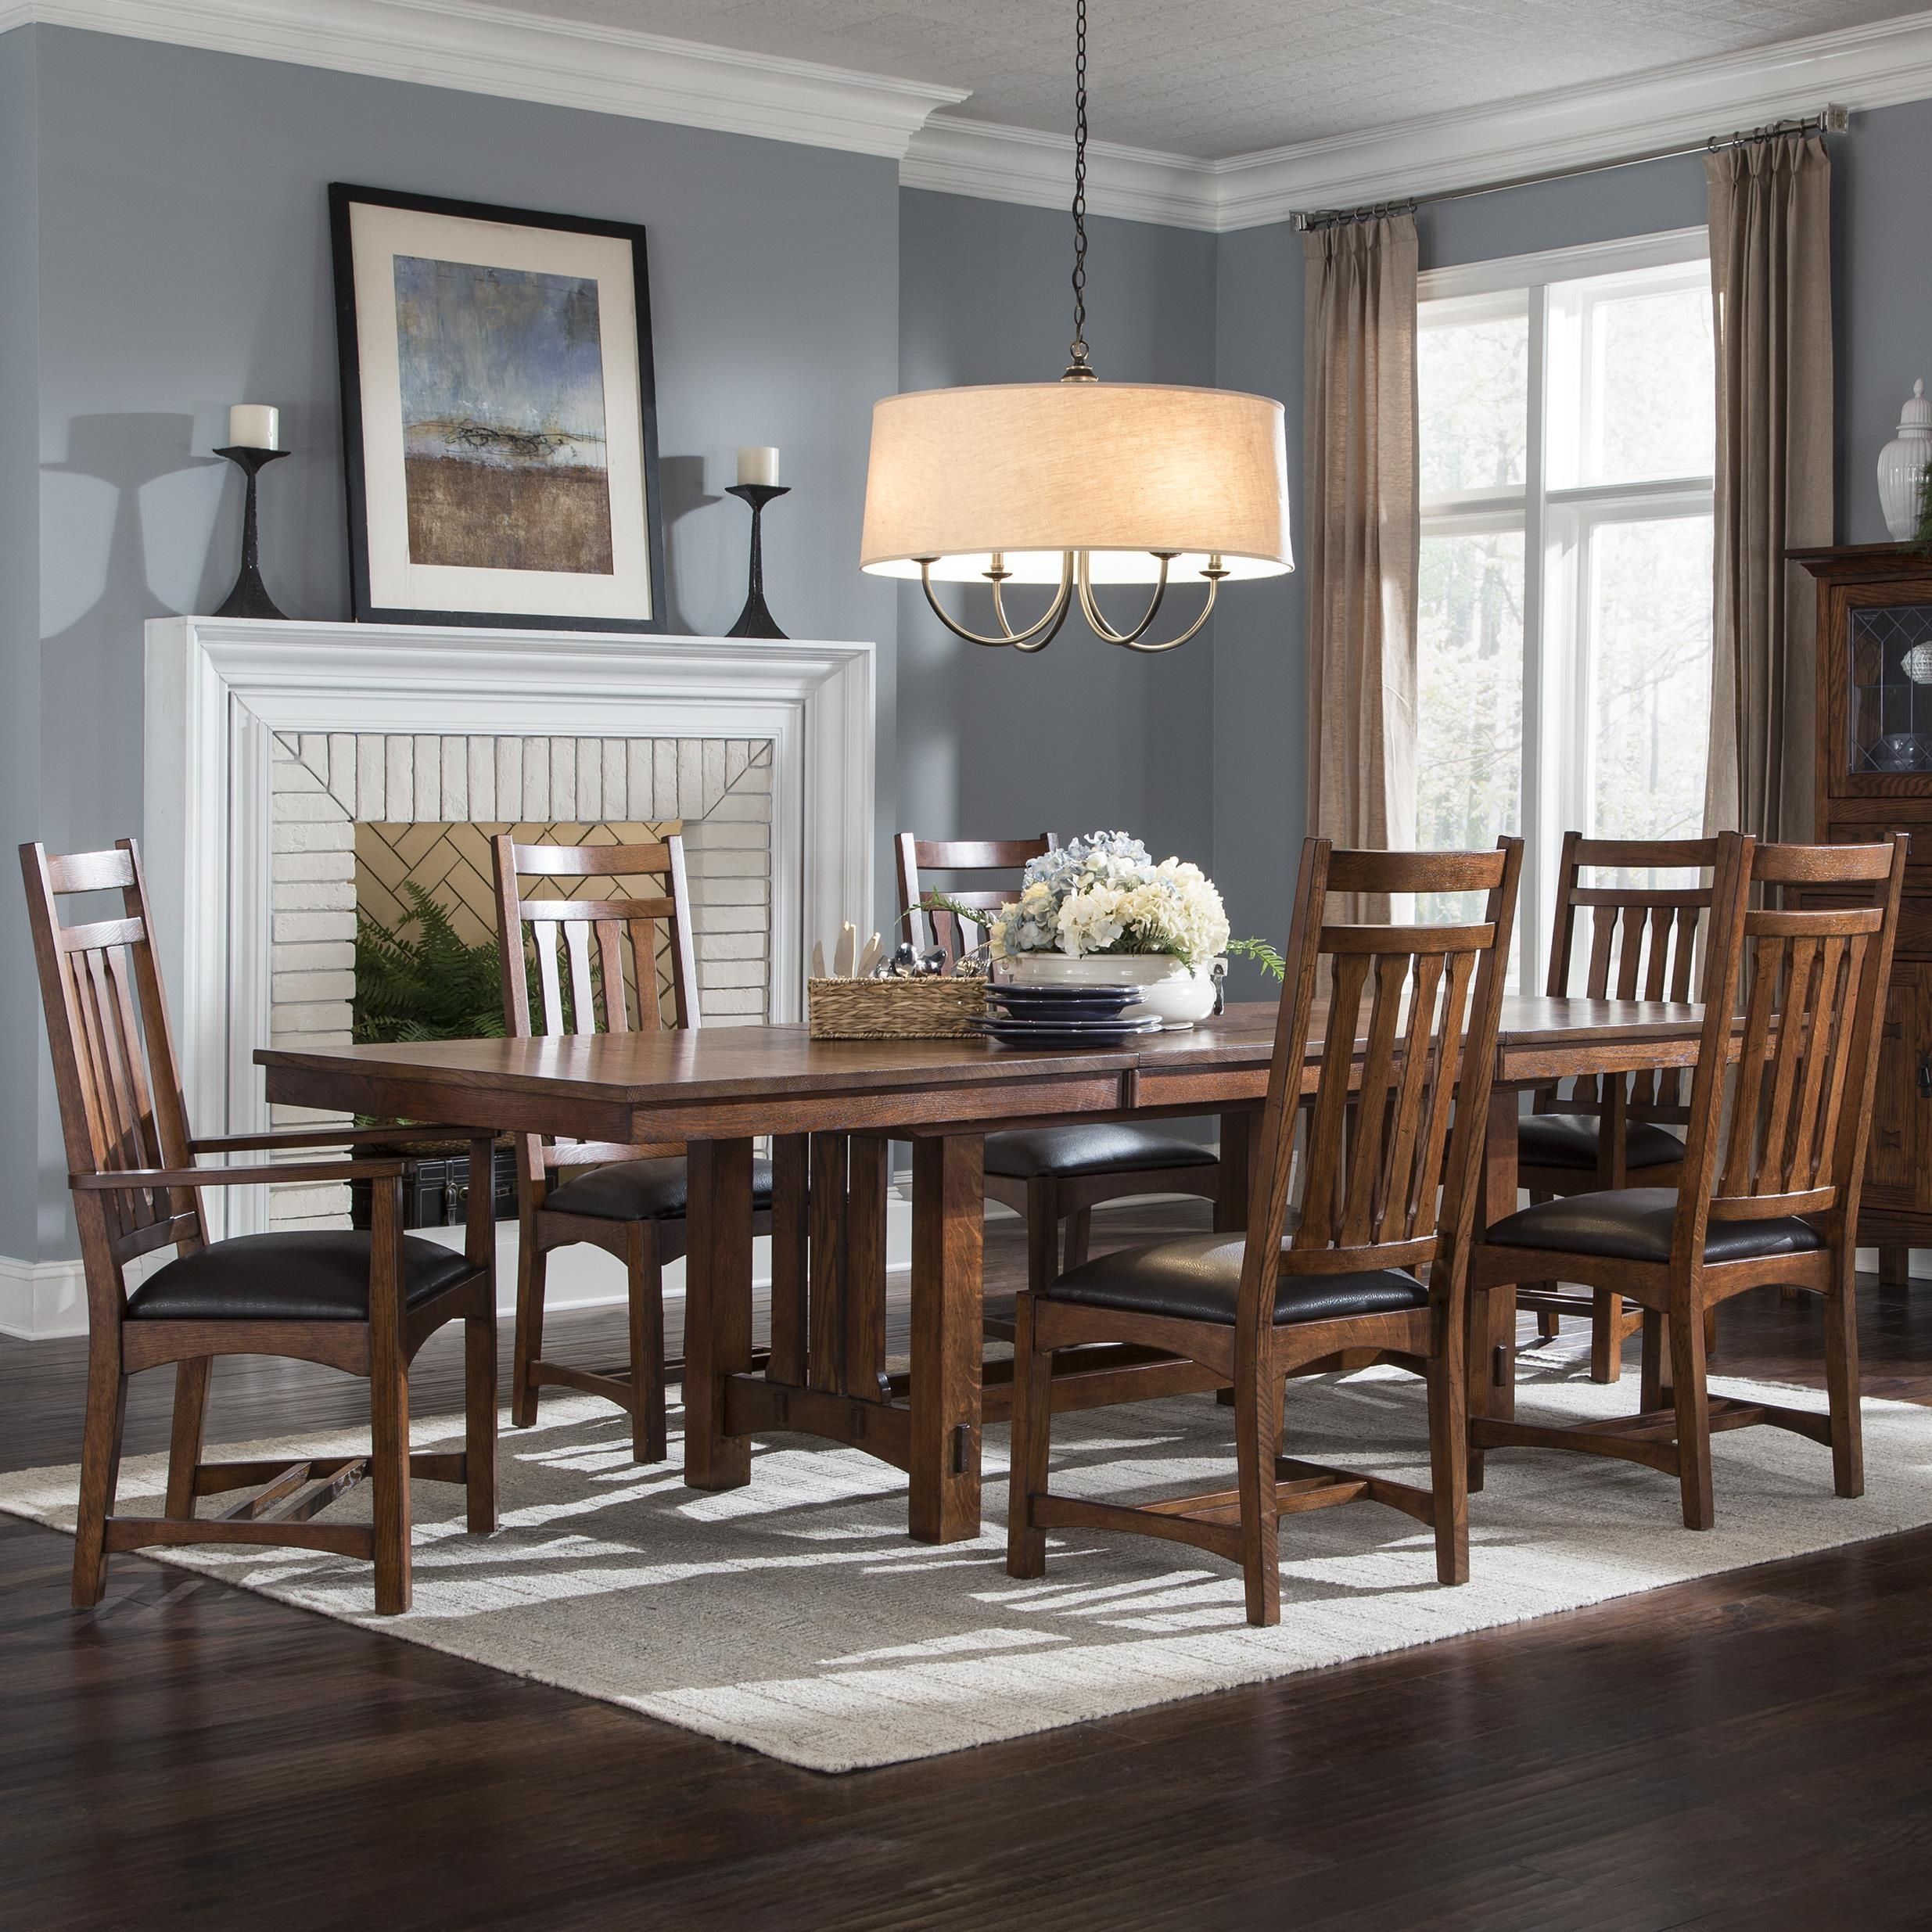 Vfm Signature Oak Park 7 Piece Dining Set With Slat Back Chairs Regarding Most Recent Craftsman 7 Piece Rectangular Extension Dining Sets With Arm & Uph Side Chairs (View 13 of 20)